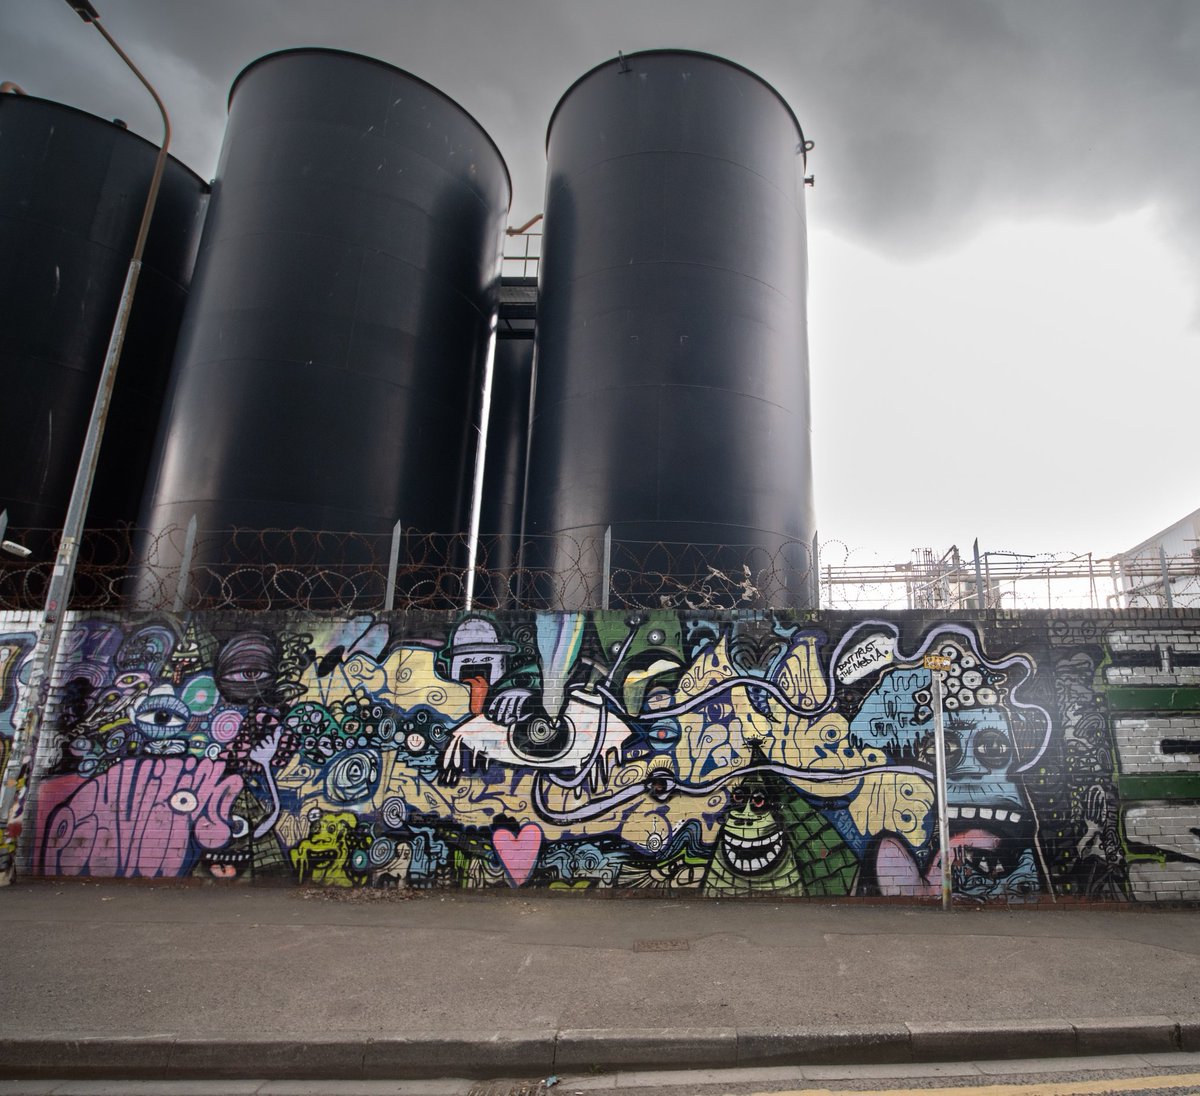 Location: Air St, #Hull Artist: psy_visions [I'm making a #graffiti documentary, check it out here: streetartandsoul.com]